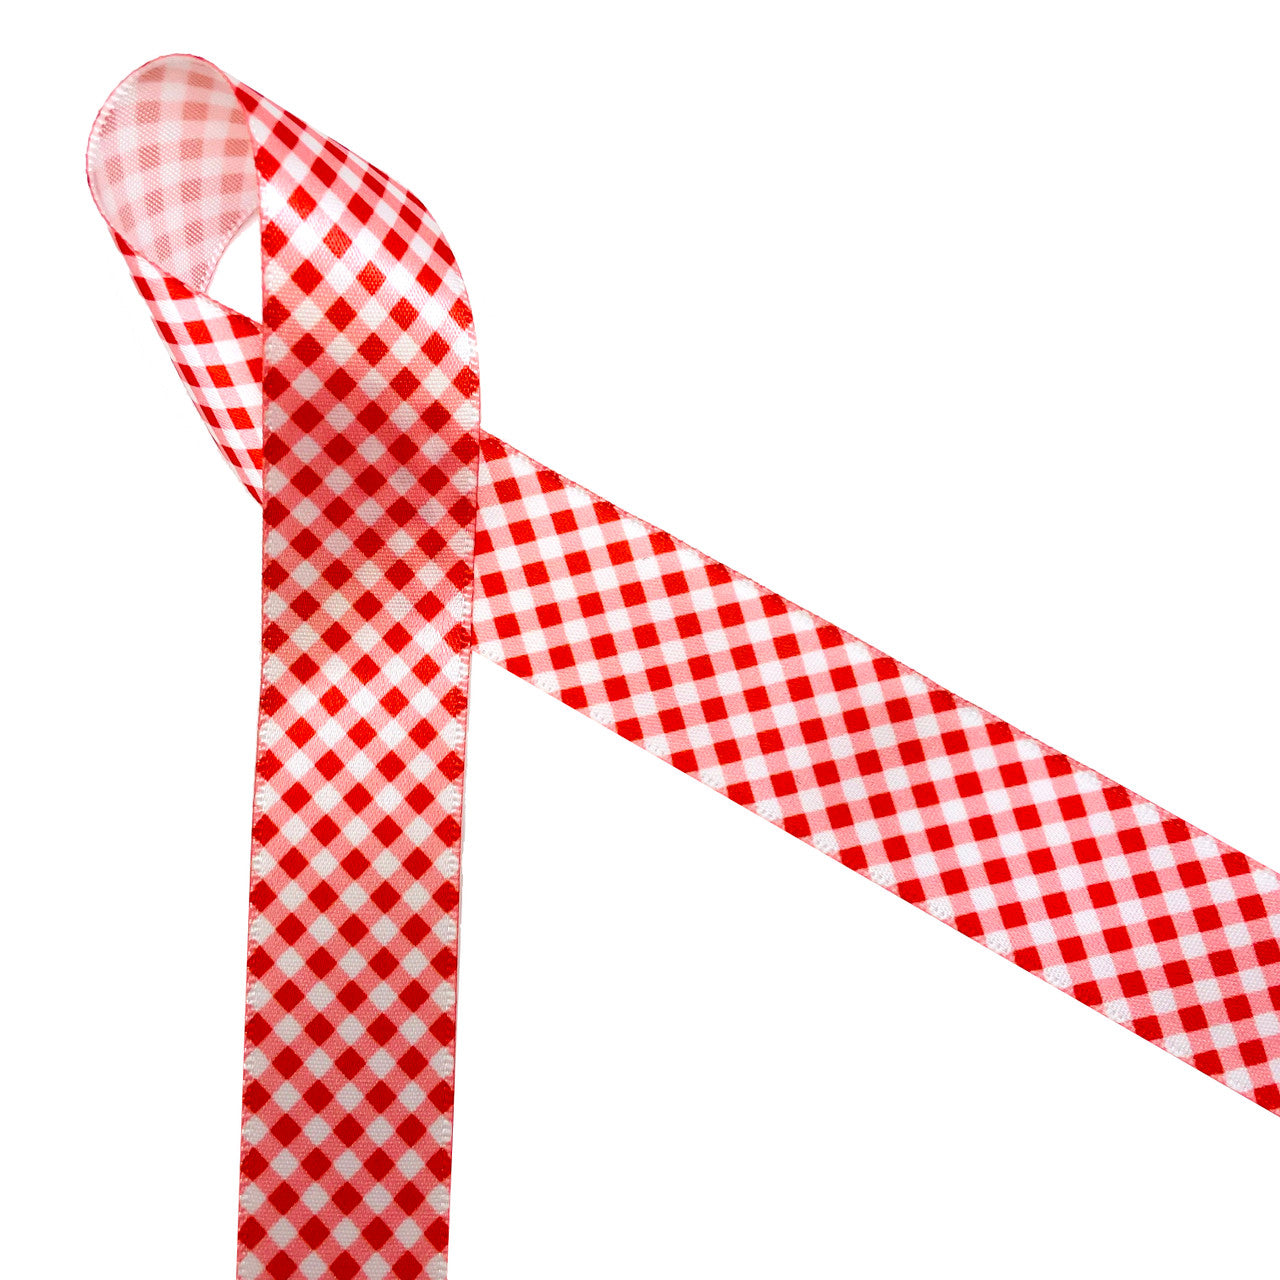 Gingham Check Ribbon in red and white printed on 7/8 white single face  satin